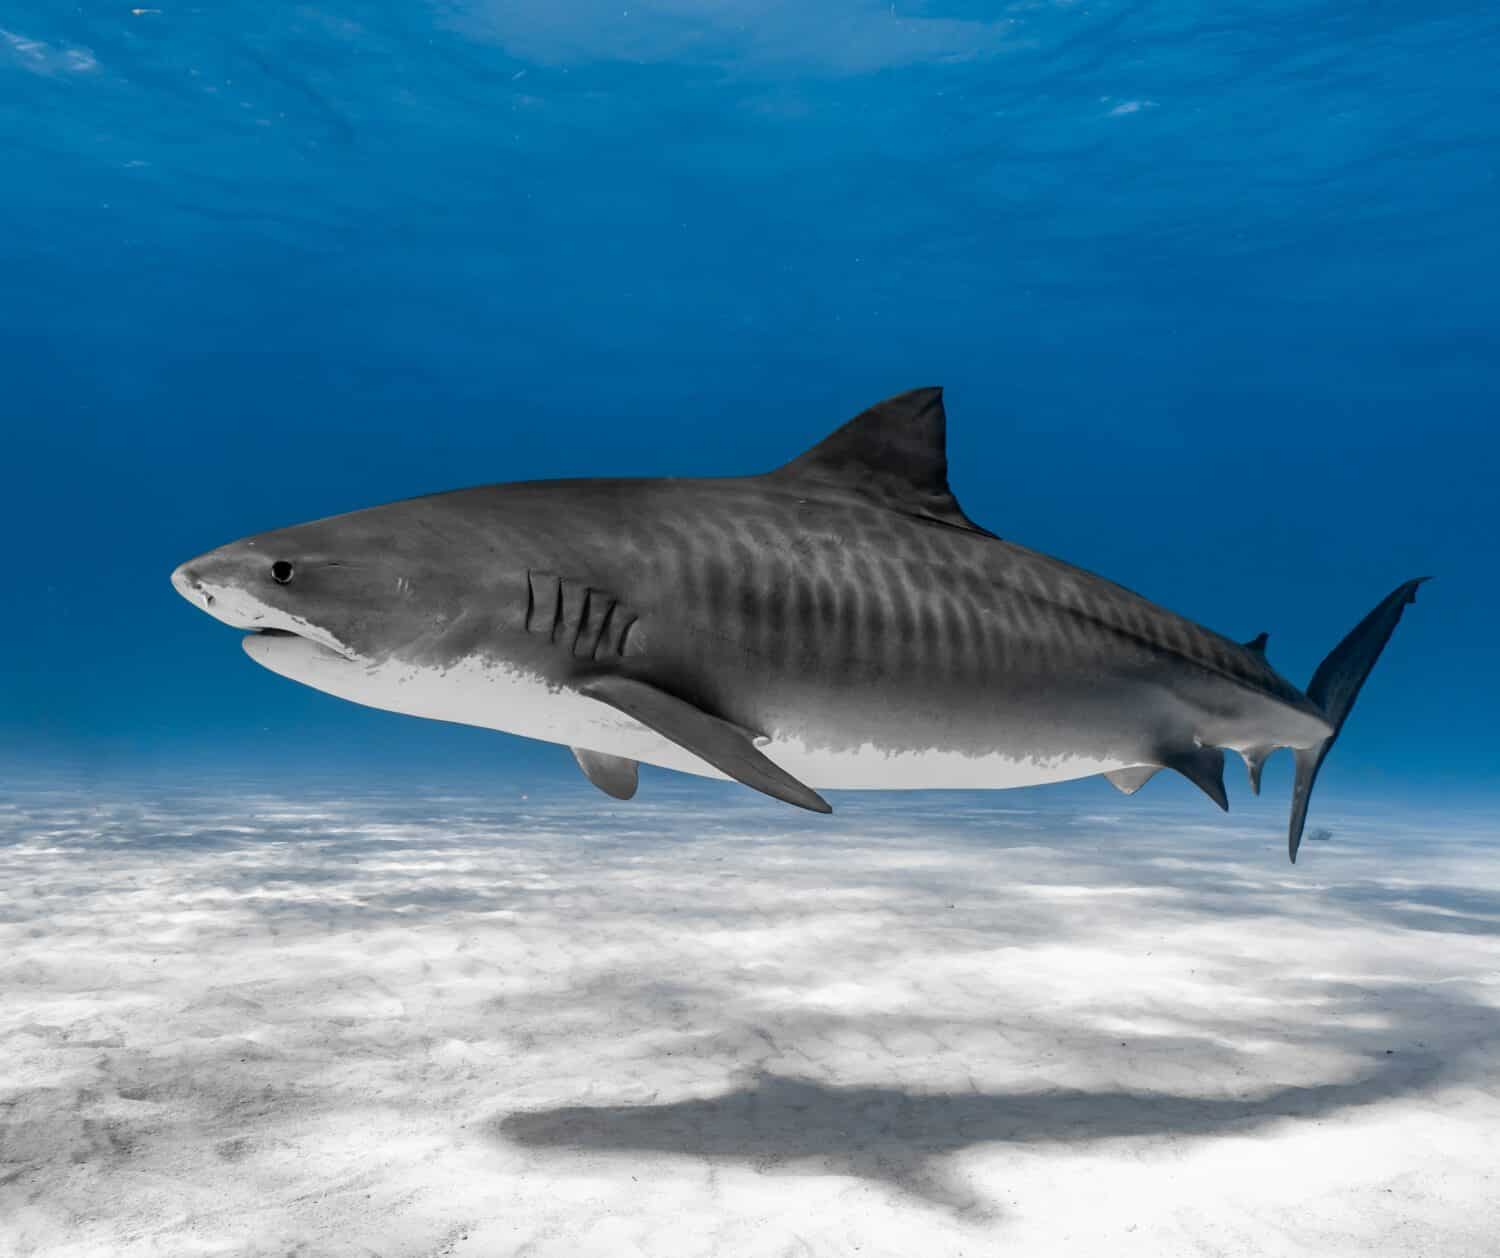 Tiger Shark Up Close Full Body Shot. Stripes showing in clear blue water with white sandy bottom. Photo taken in The Bahamas.